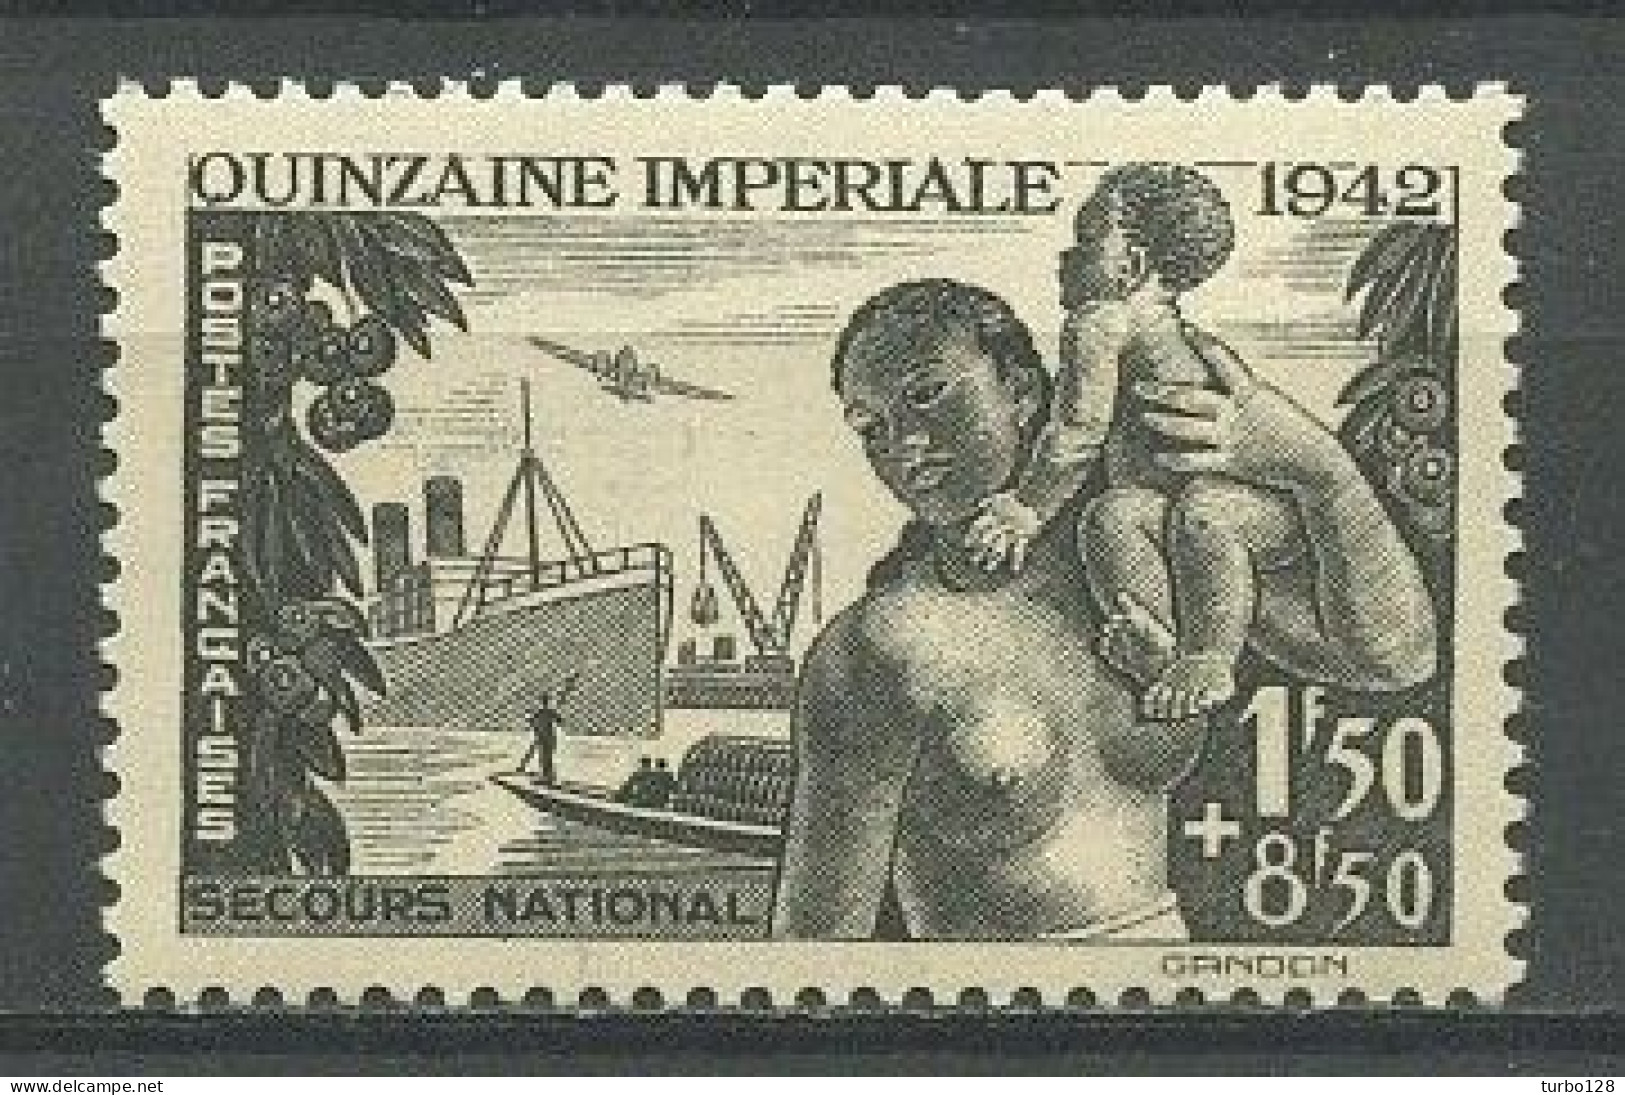 FRANCE 1942 N° 543 ** Neuf MNH Superbe C 1.30 € Avions Planes Femme Africaine Quinzaine Impériale - Unused Stamps